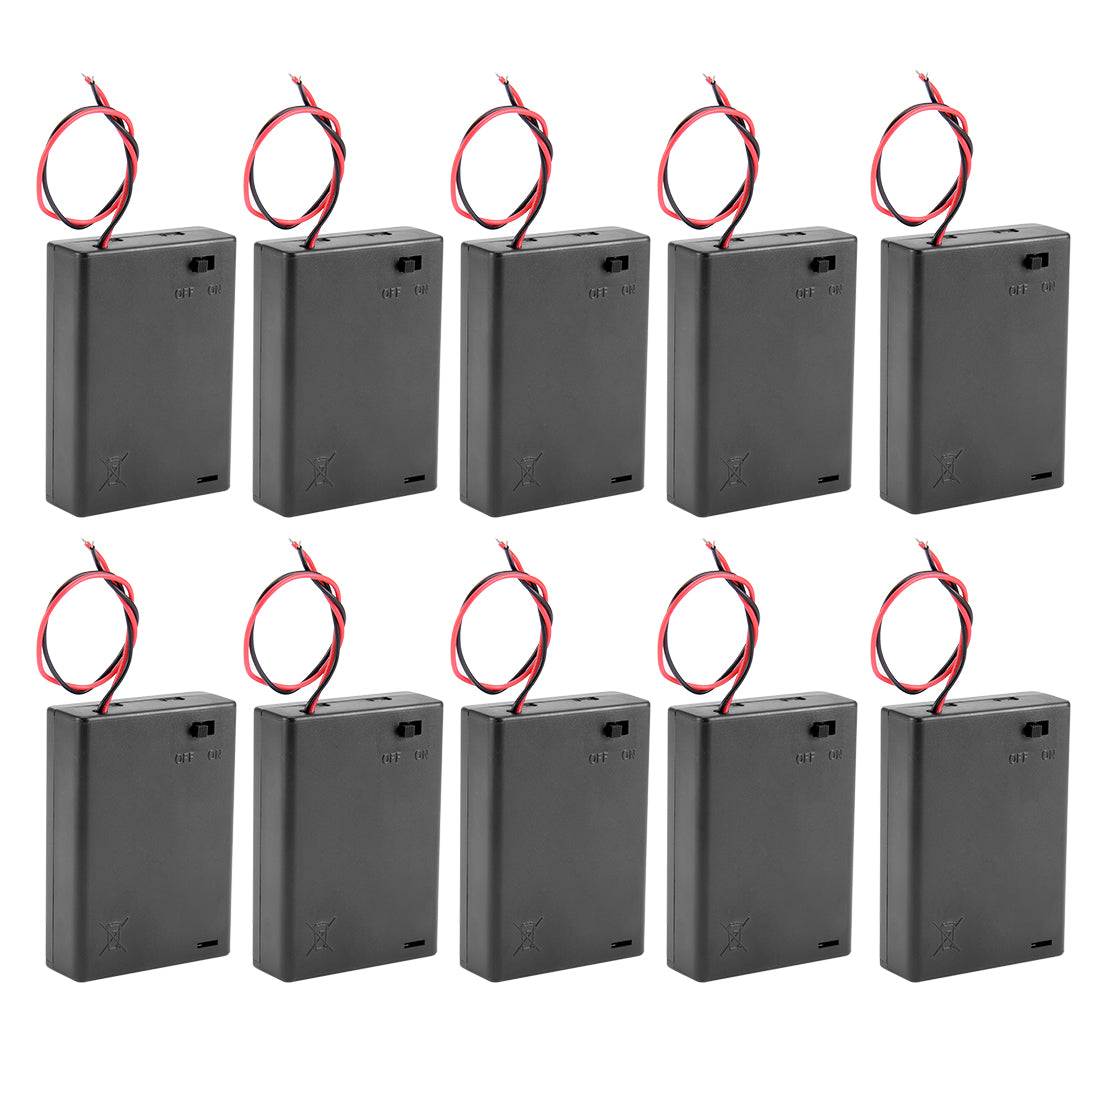 uxcell Uxcell 10 Pcs 4.5V Battery Case Storage Box 3 x 1.5V AA Batteries Wired ON/OFF Switch w Cover